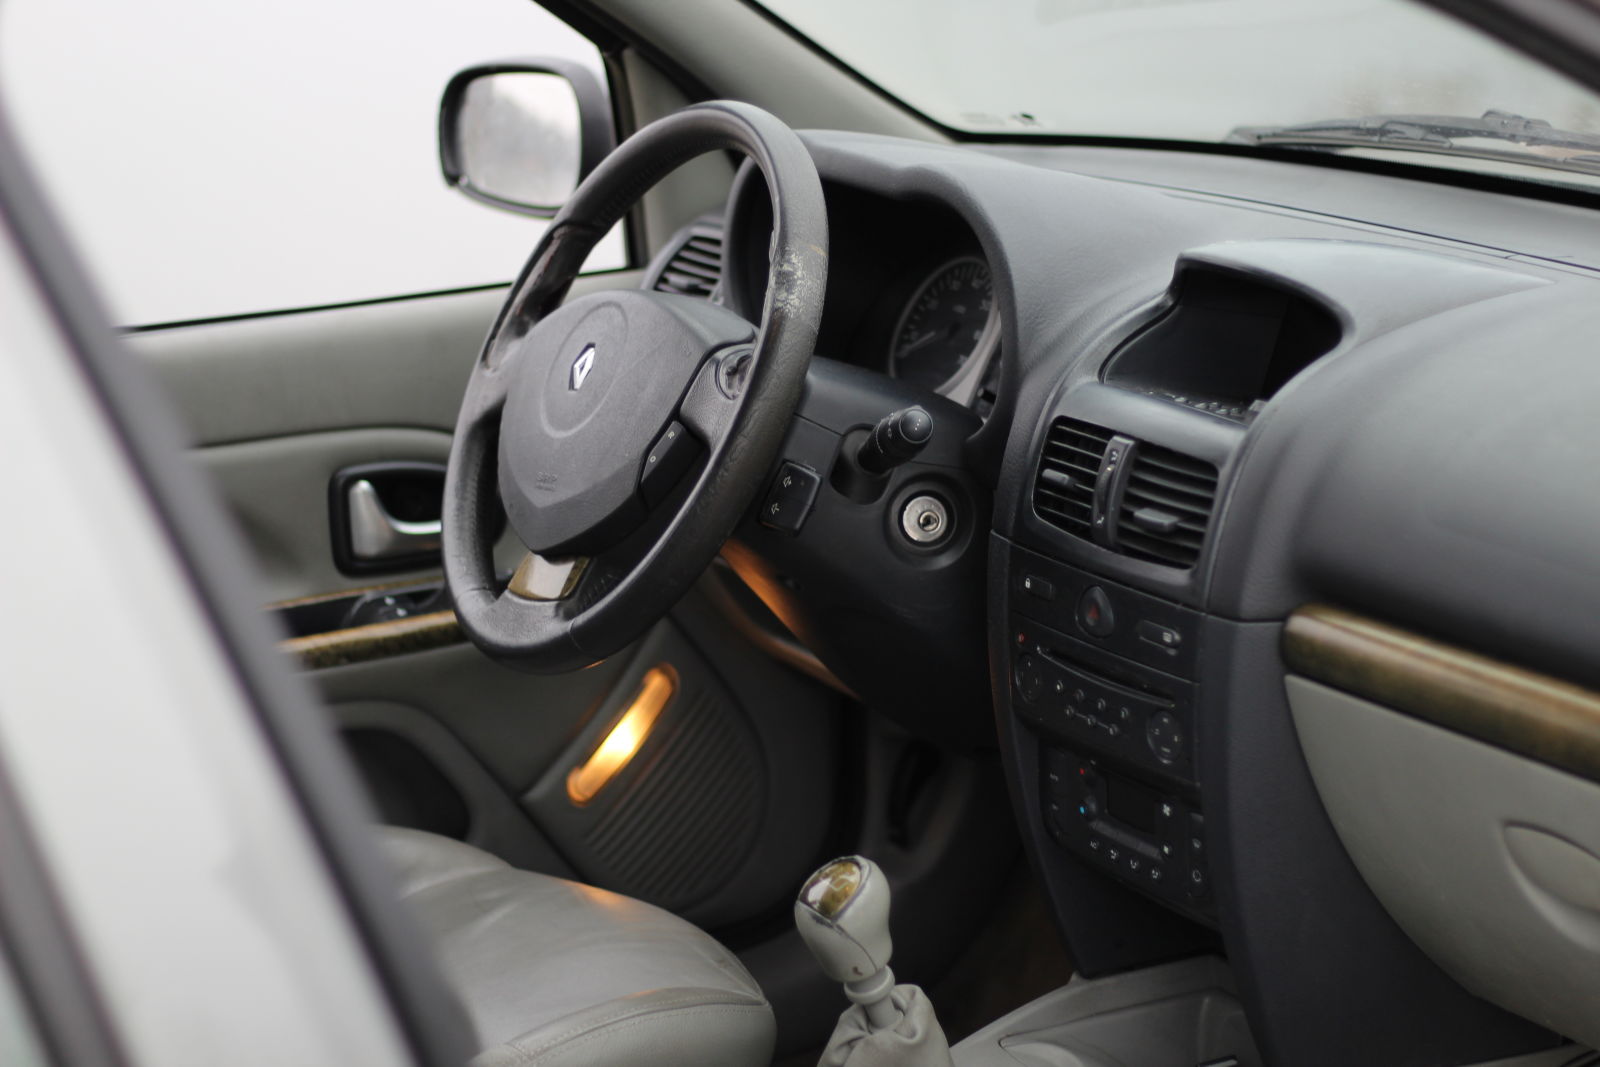 Leather and real wood in a 2003 Renault Clio!